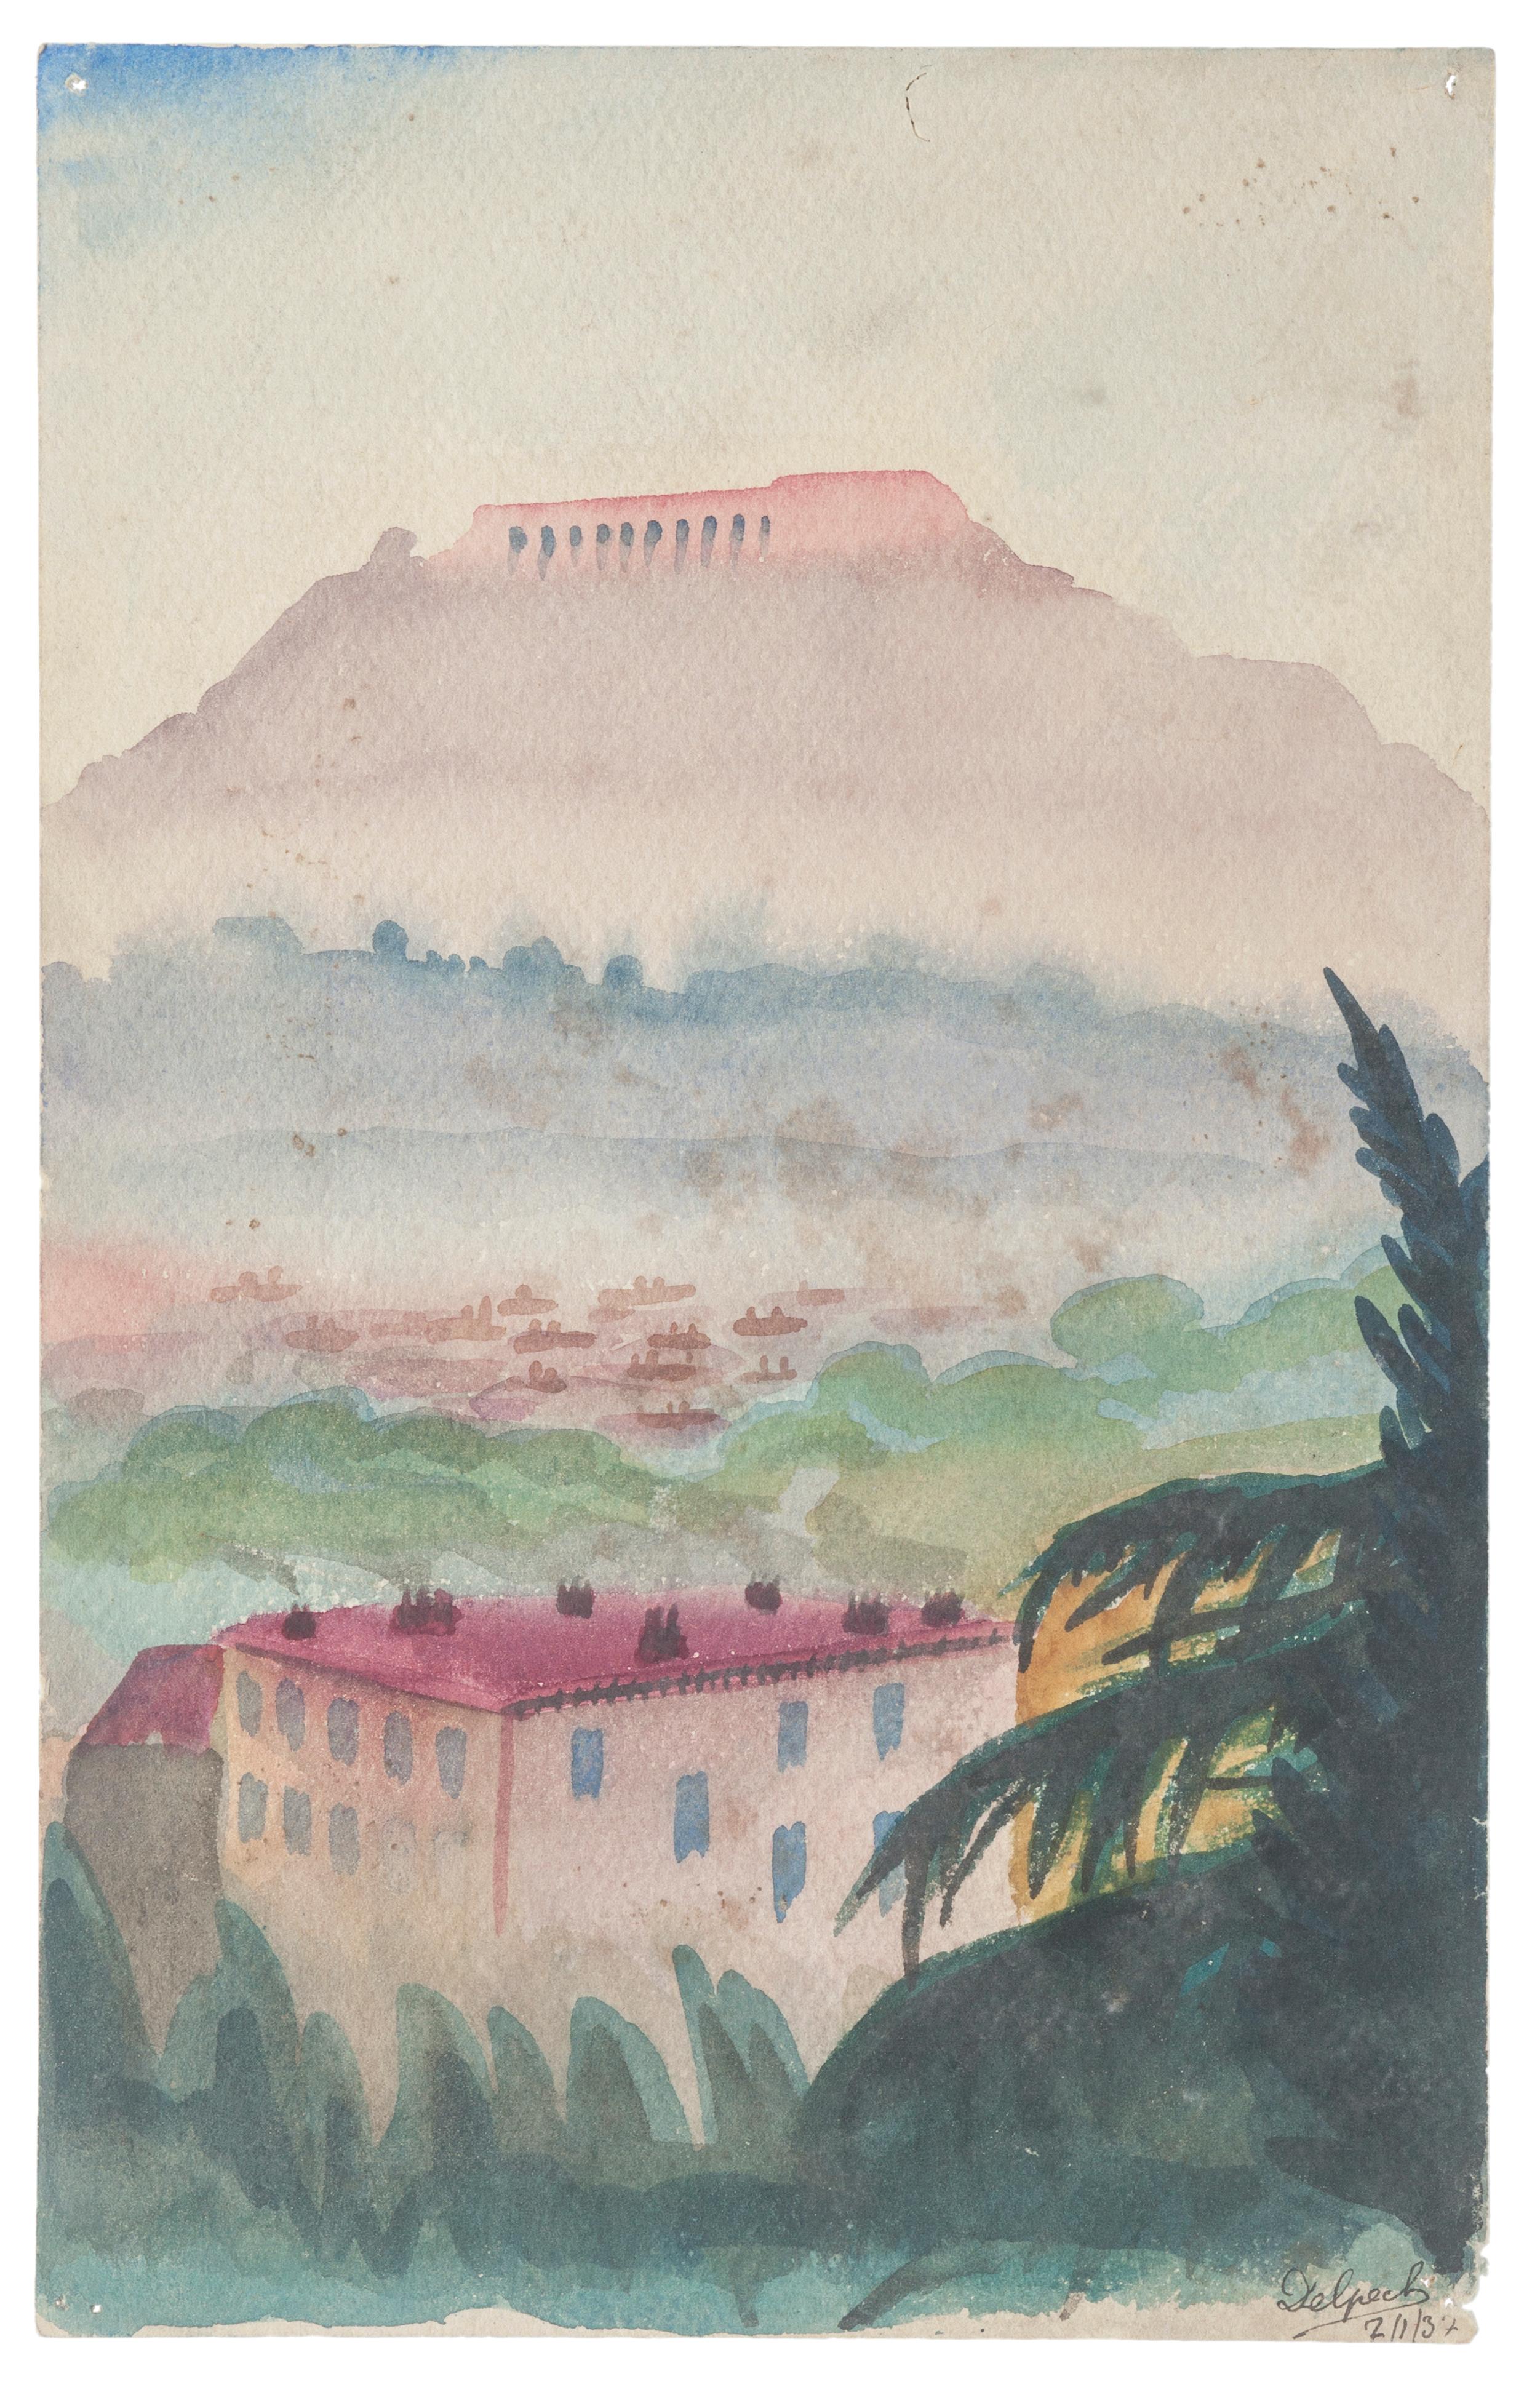 Athens: View of The Akropolis is a drawing in tempera and watercolor on paper, realized by Jean Delpech (1916-1988). 
The state of preservation of the artwork is very good.

Sheet dimension: 23.5 x 15.3 cm.

The artwork represents beautiful